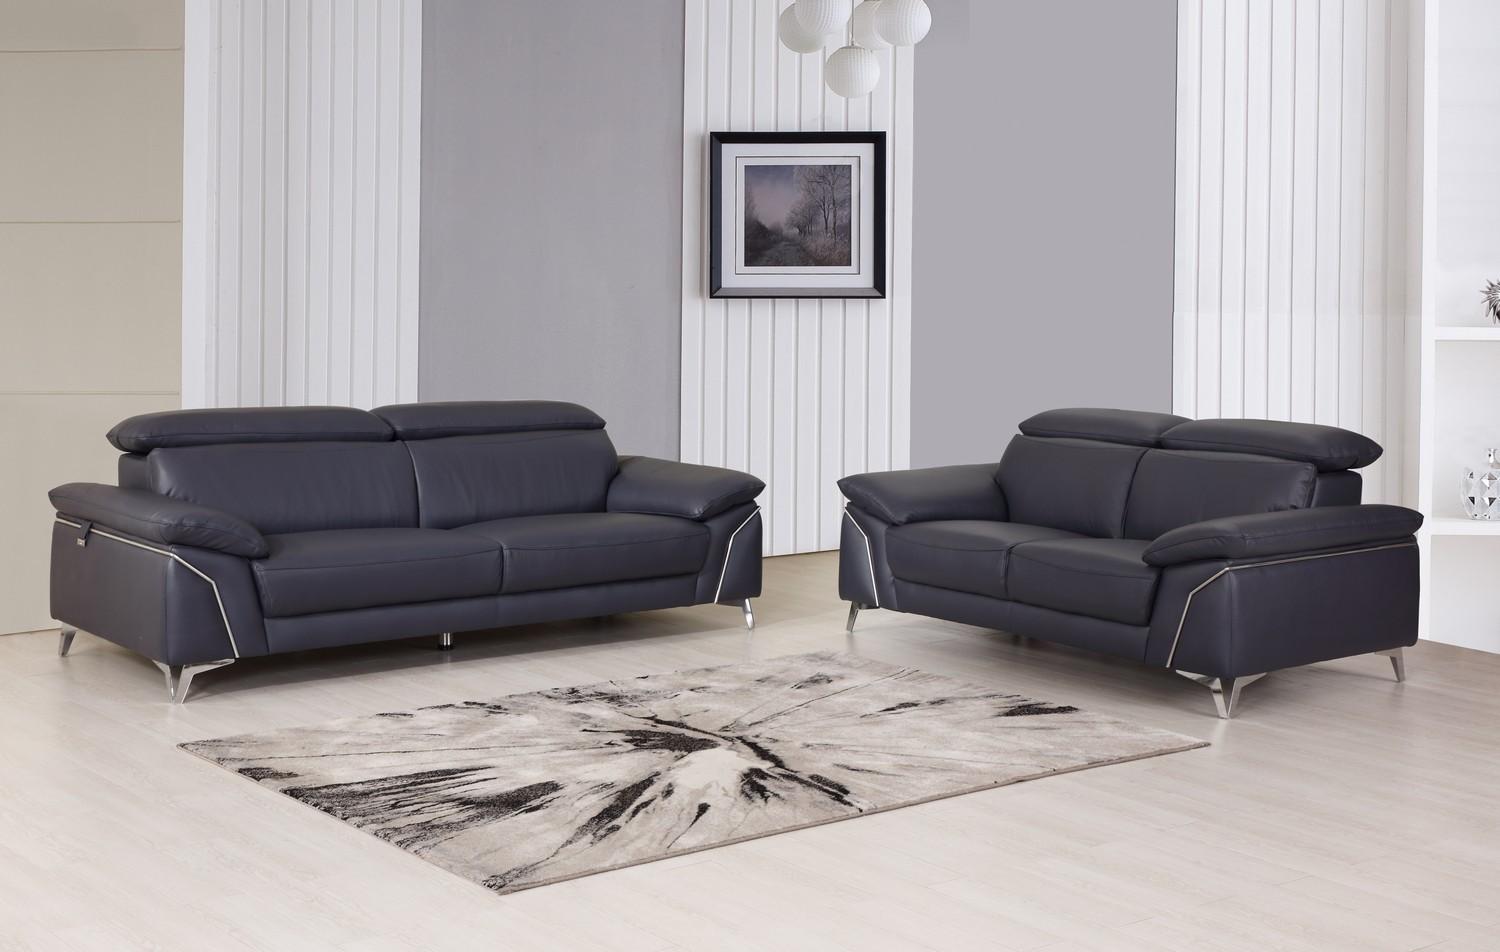 Contemporary Sofa and Loveseat Set 727 727-NAVY-2PC in Navy blue Italian Leather